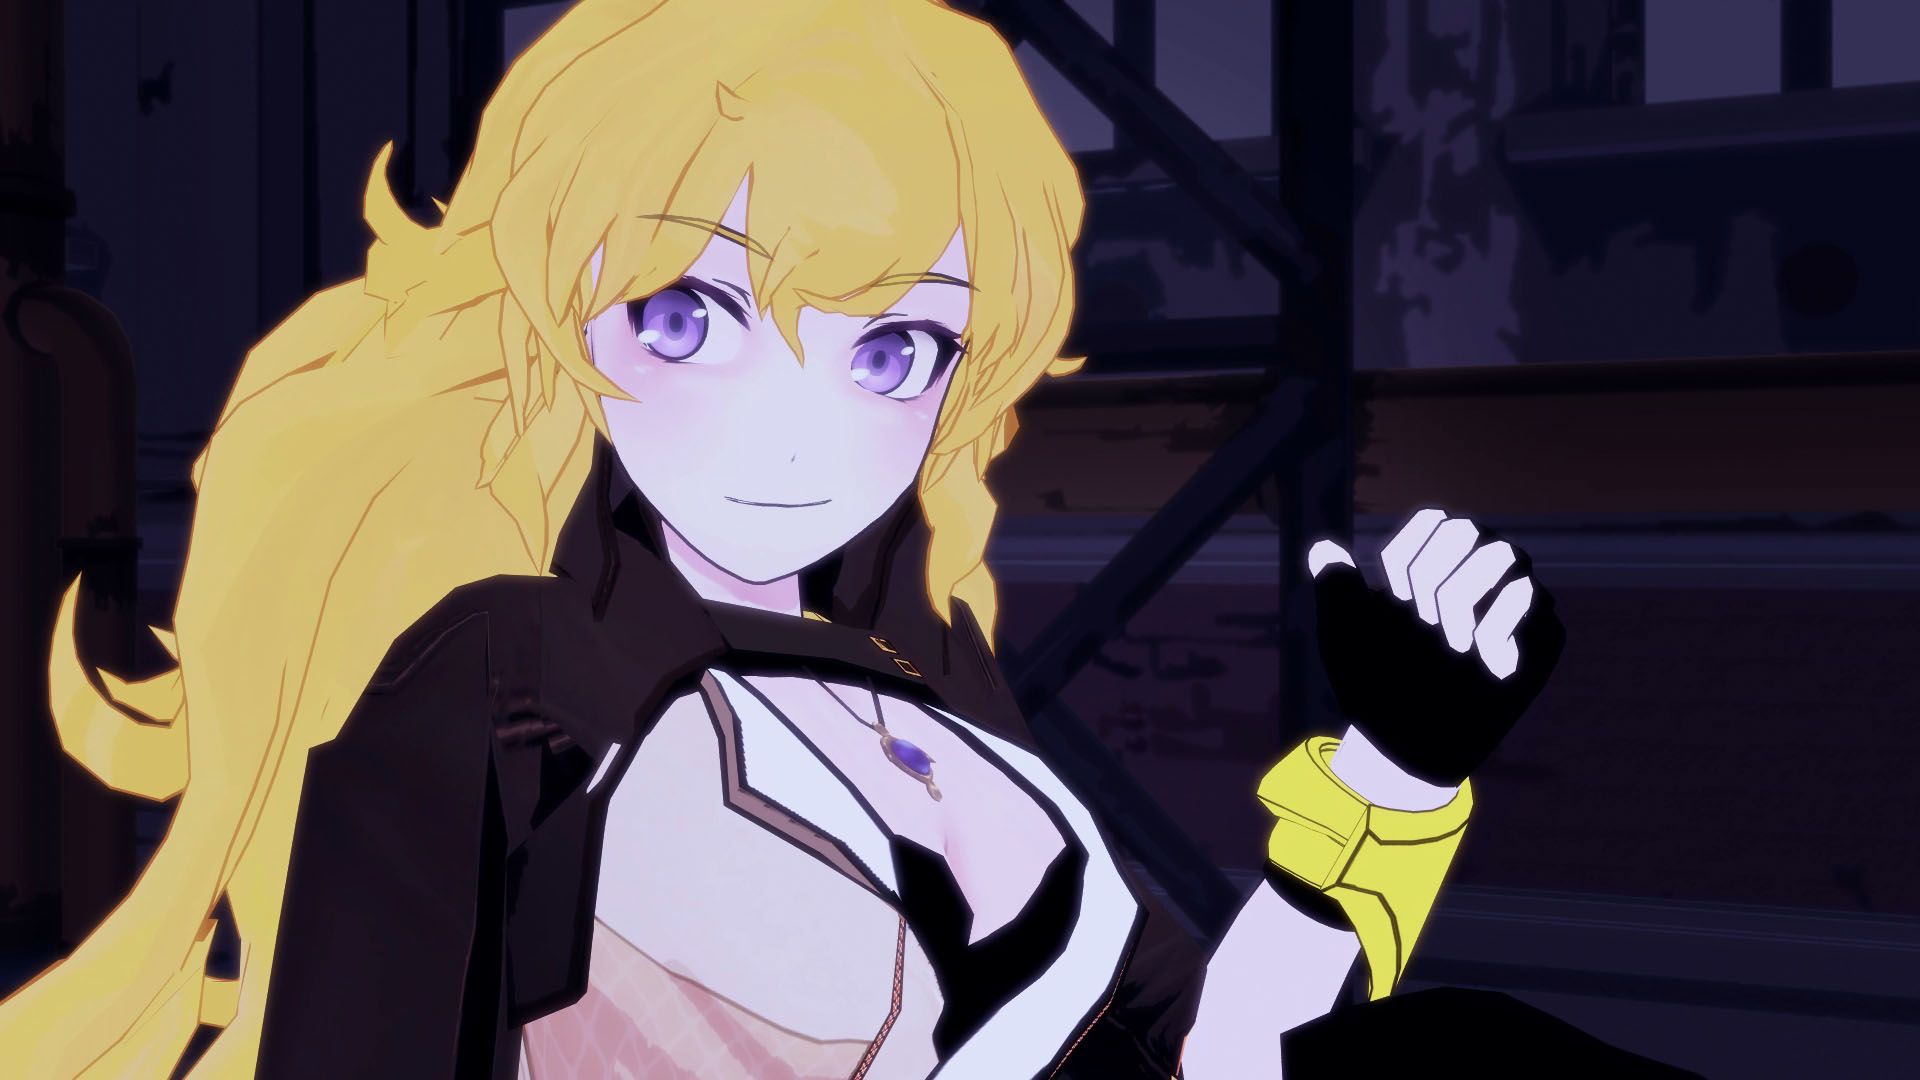 Action Adventure Anime, RWBY, Returns With More Mystery And Conspiracy In  Volume 5: Episode 1 | Film Combat Syndicate